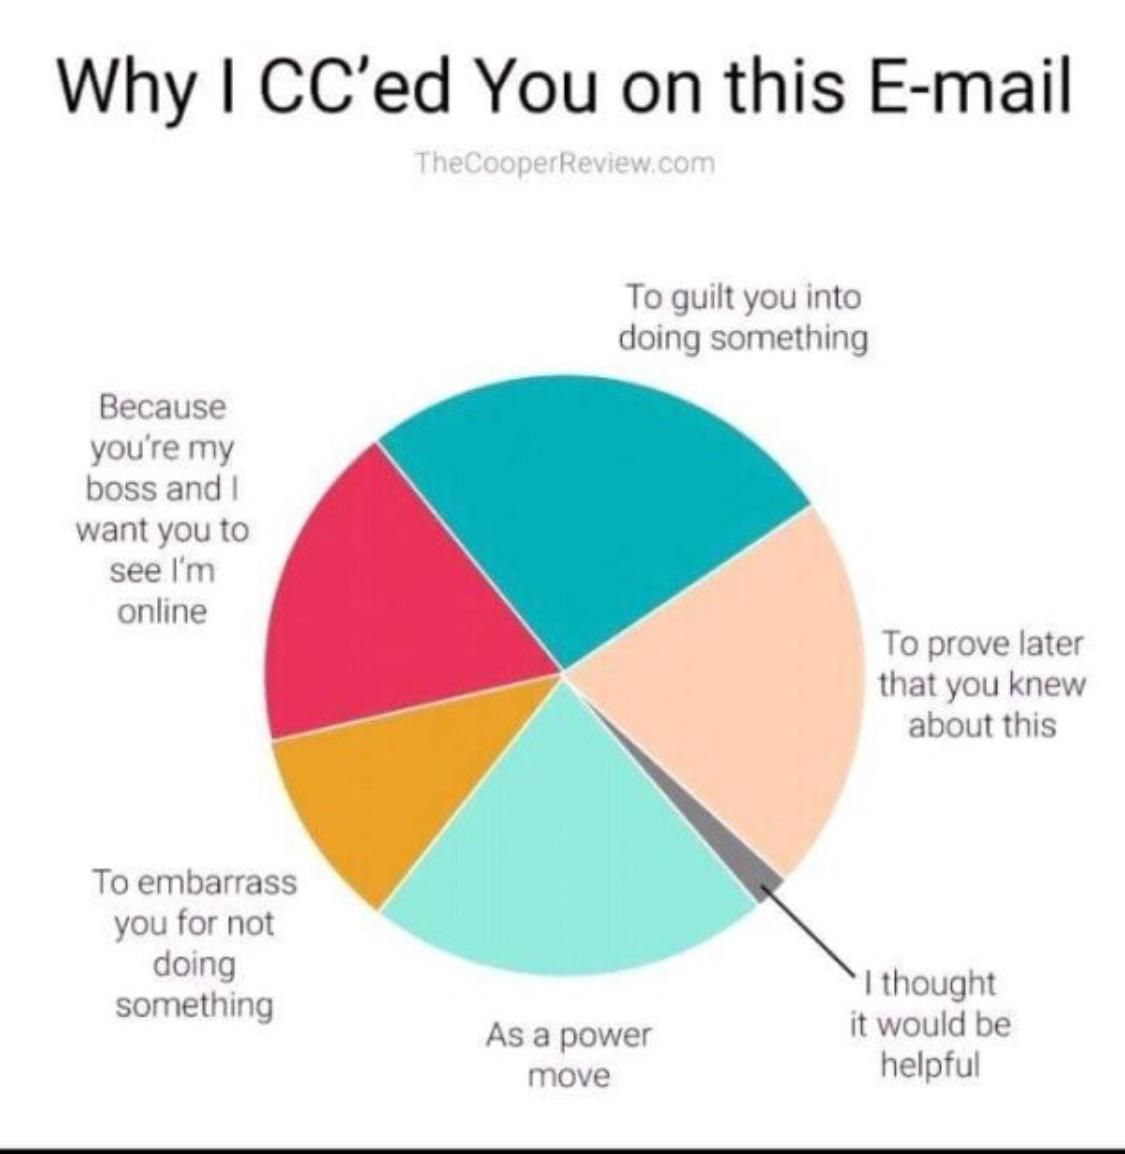 Has this been posted before? Shout out to thecooperreview.com for such an accurate email pie chart